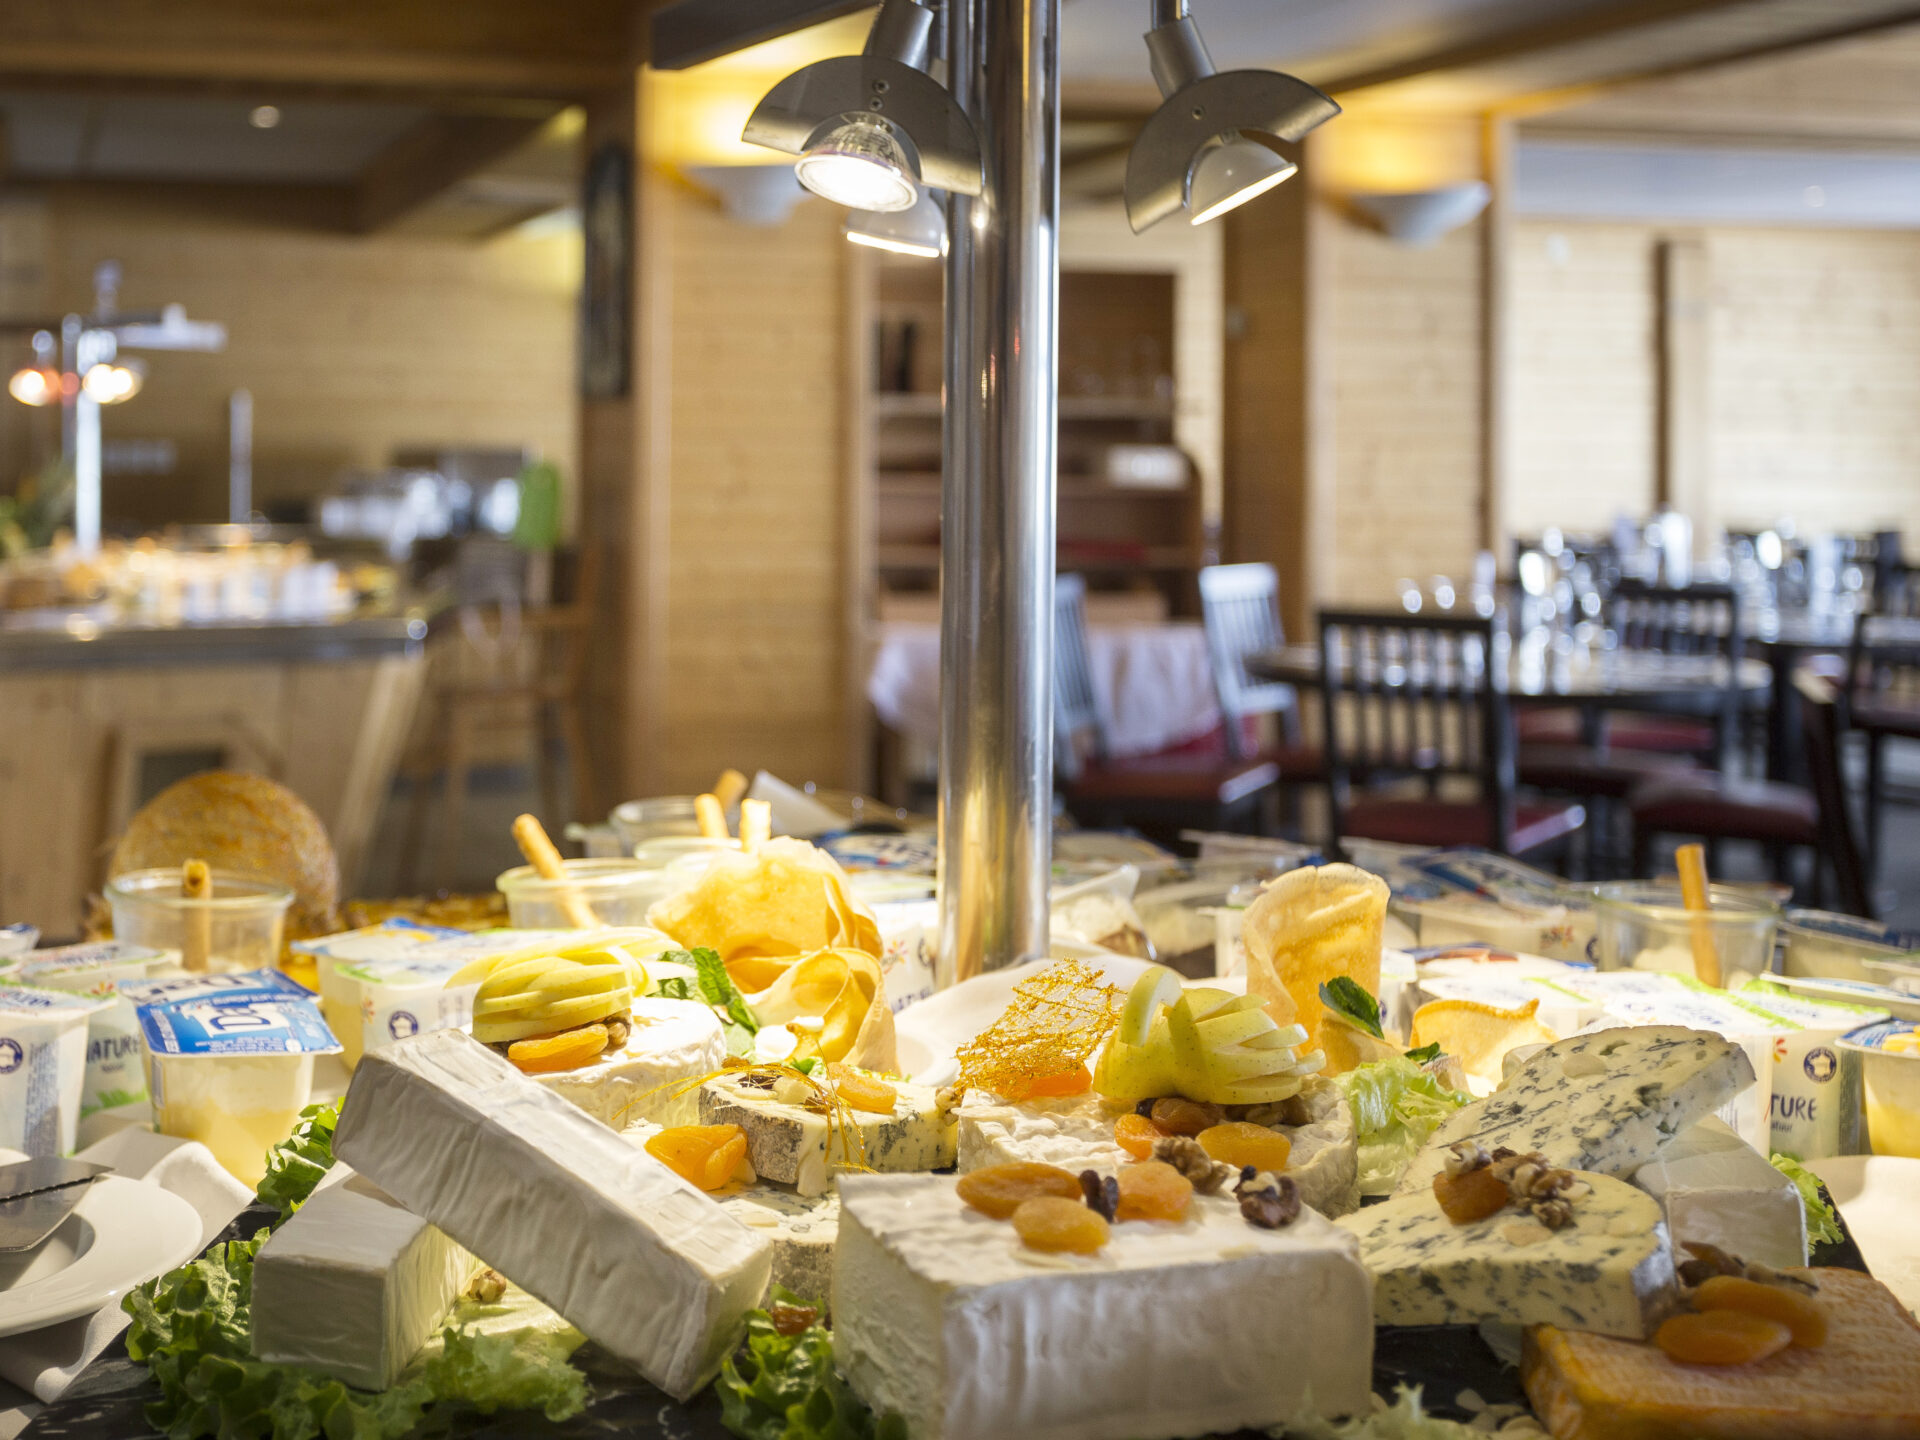 An image of the cheese buffet at Hotel Club MMV Altitude